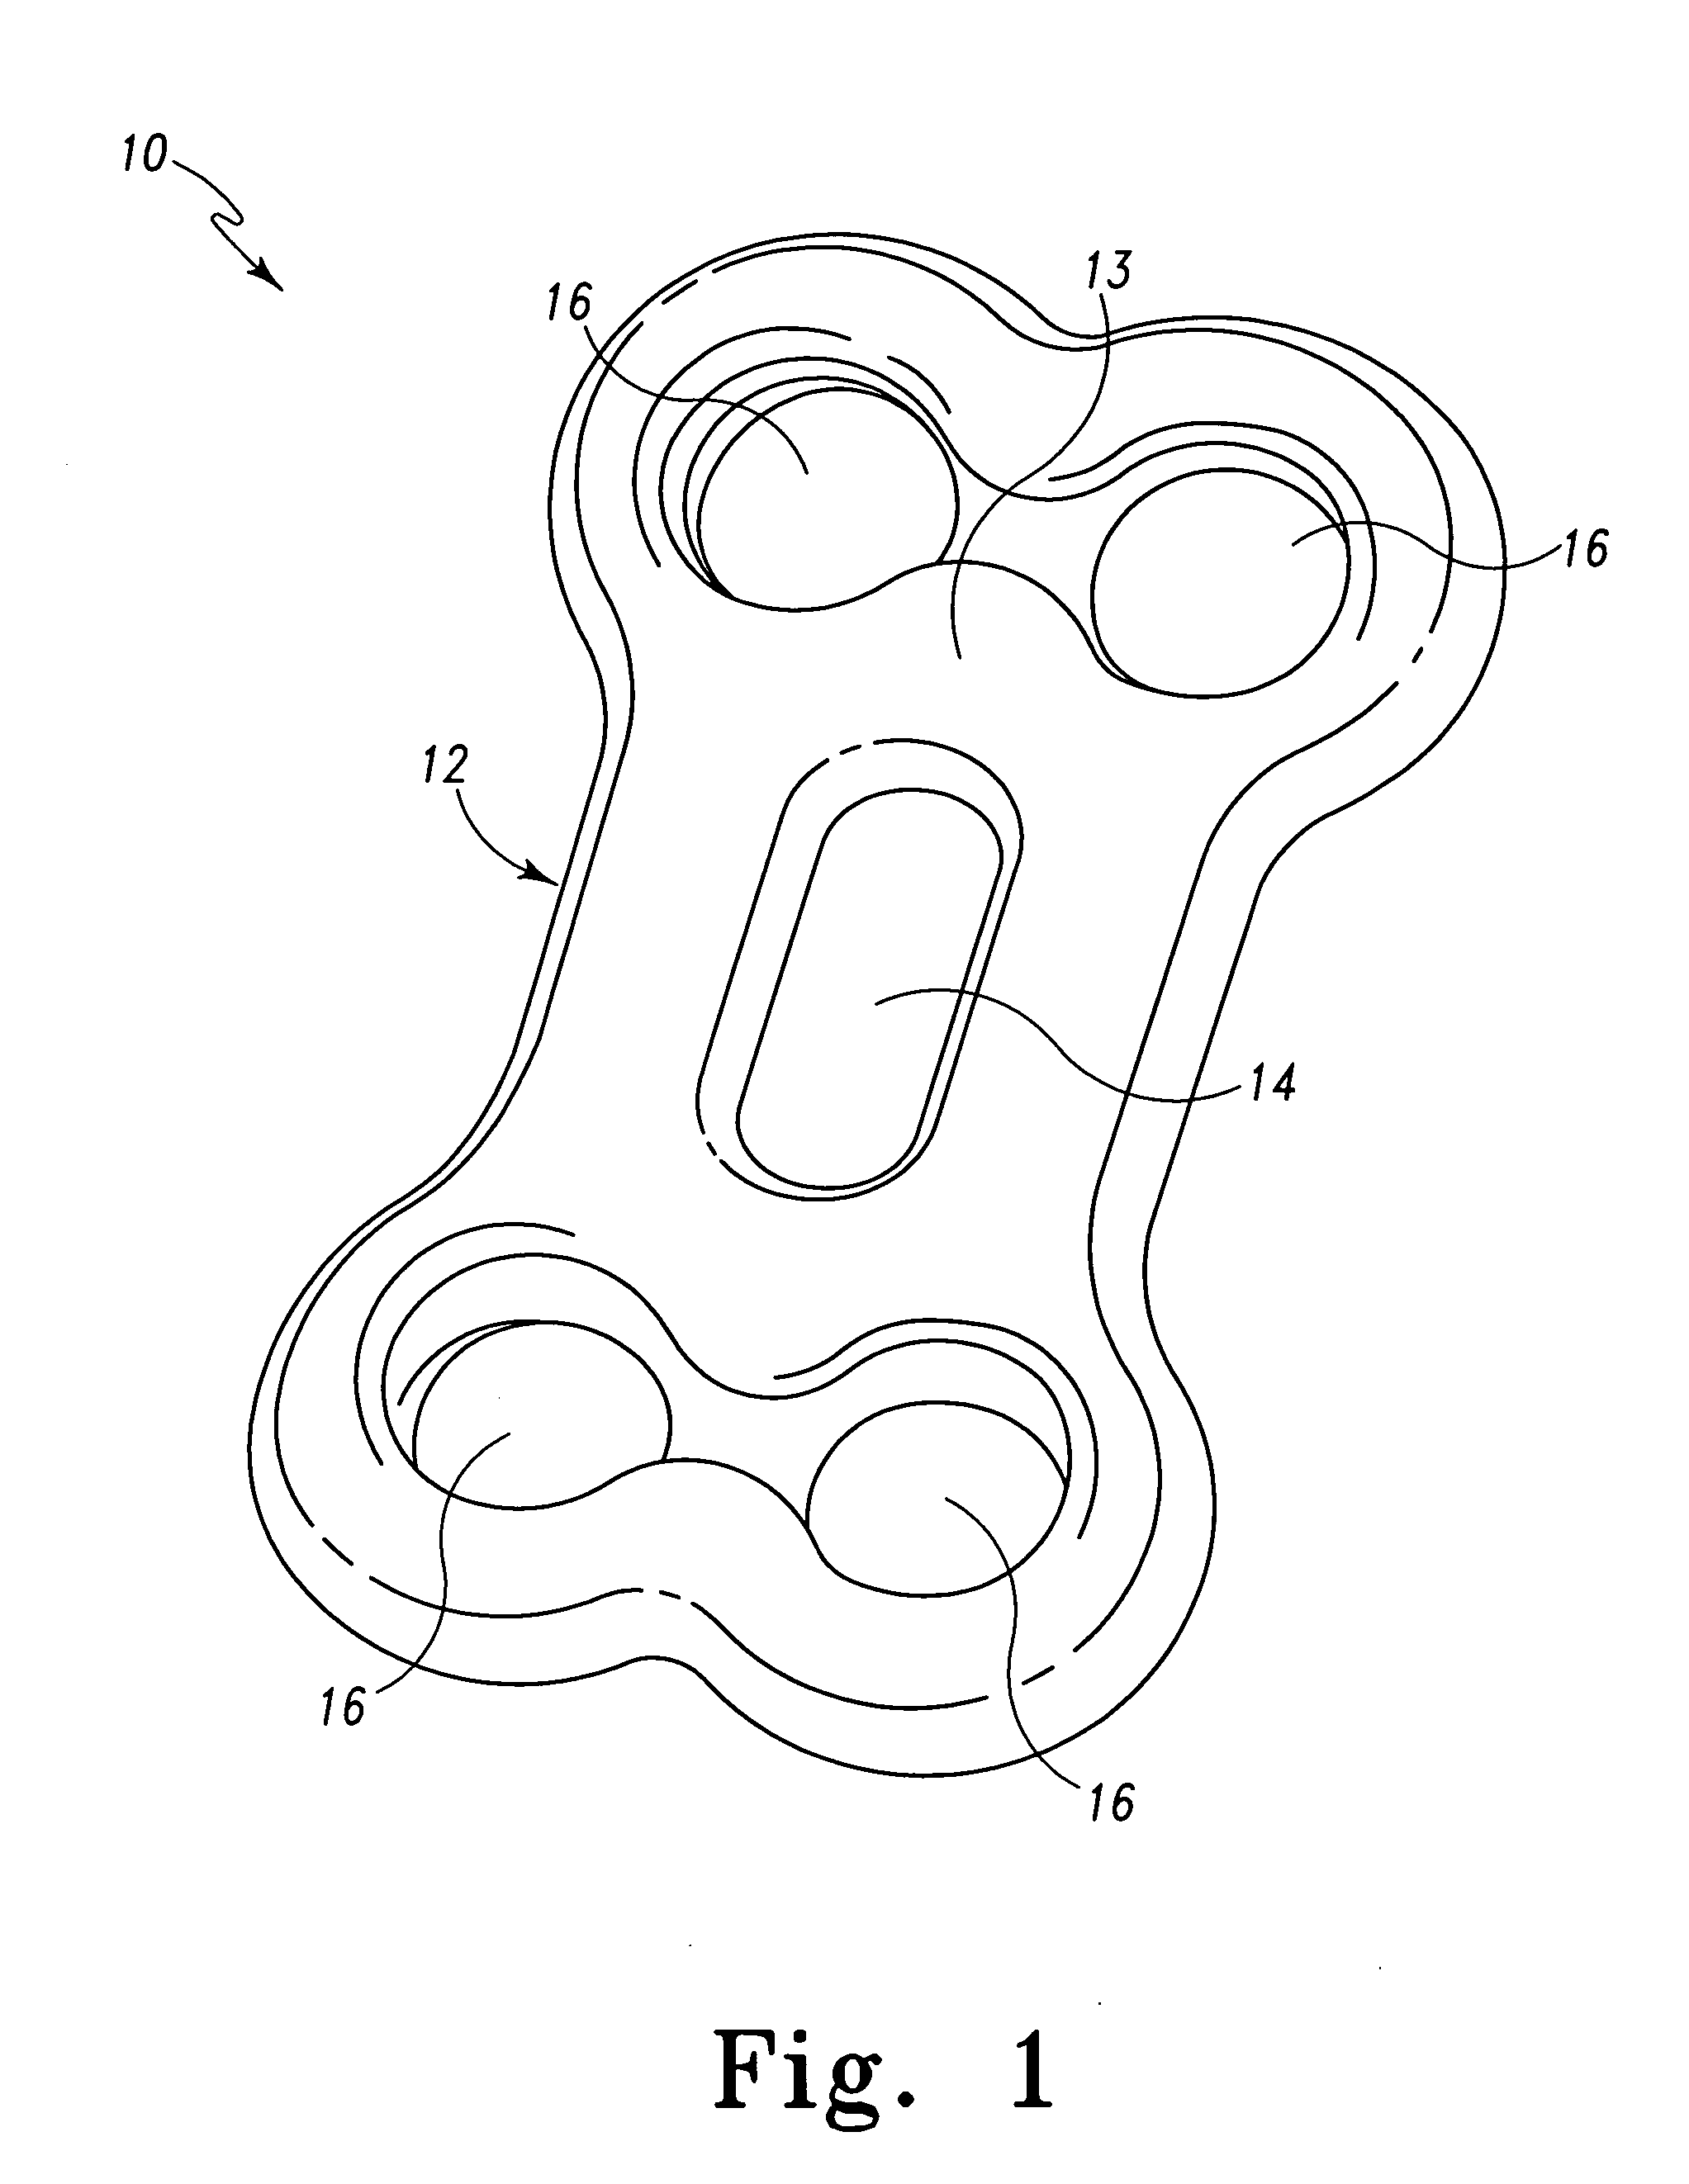 Method of fabricating medical devices and medical devices made thereby